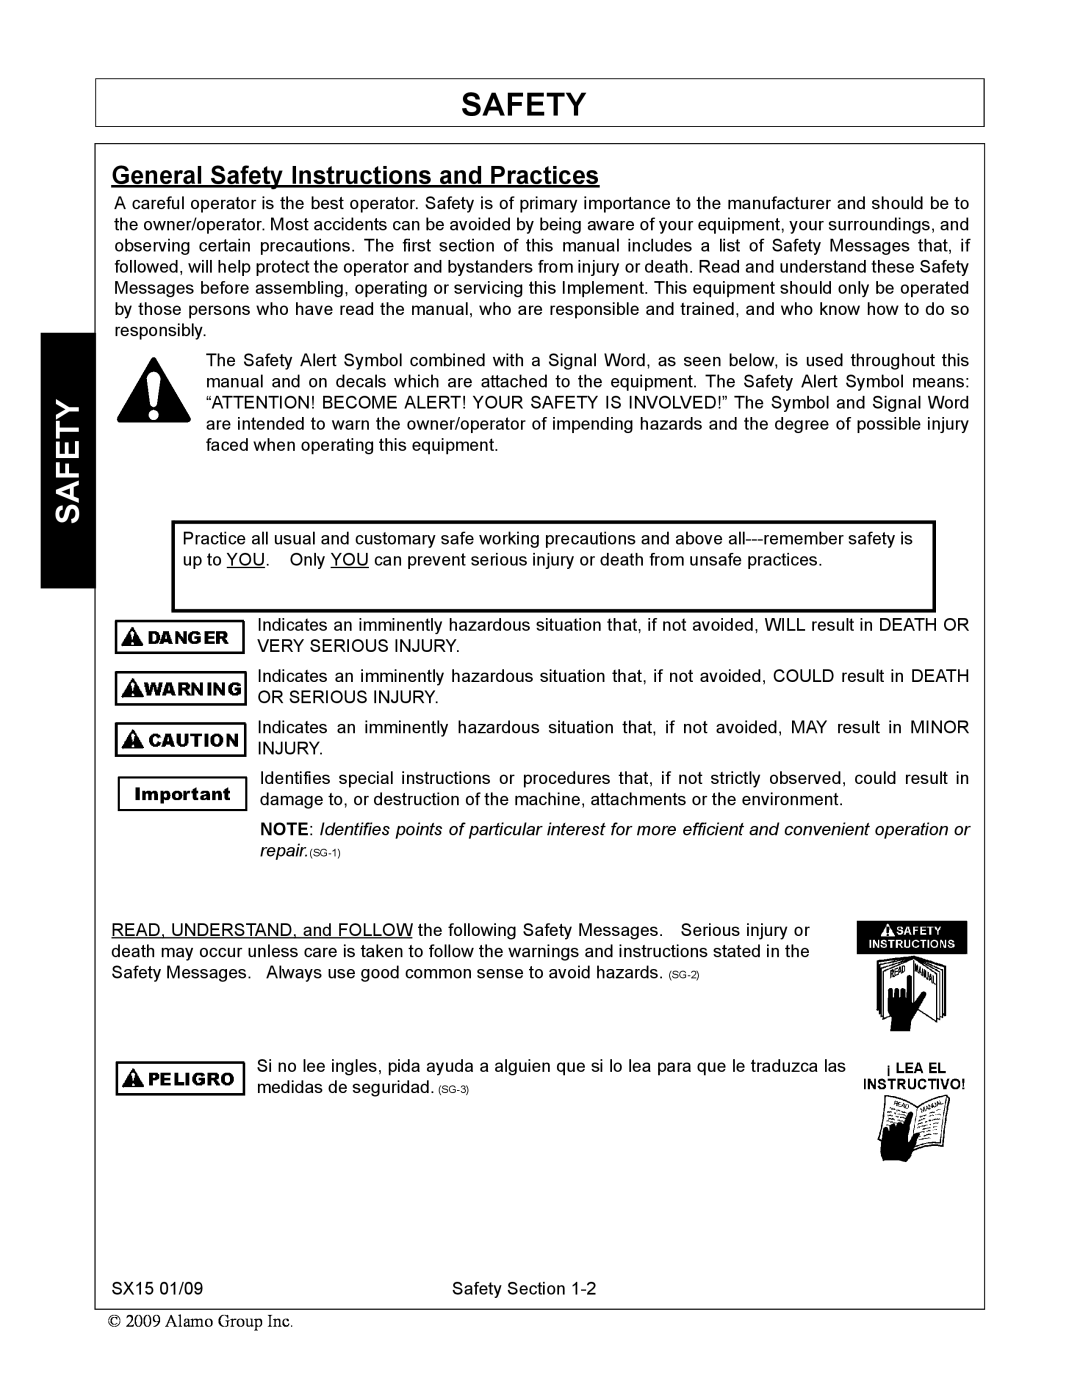 Alamo SX15 manual General Safety Instructions and Practices 